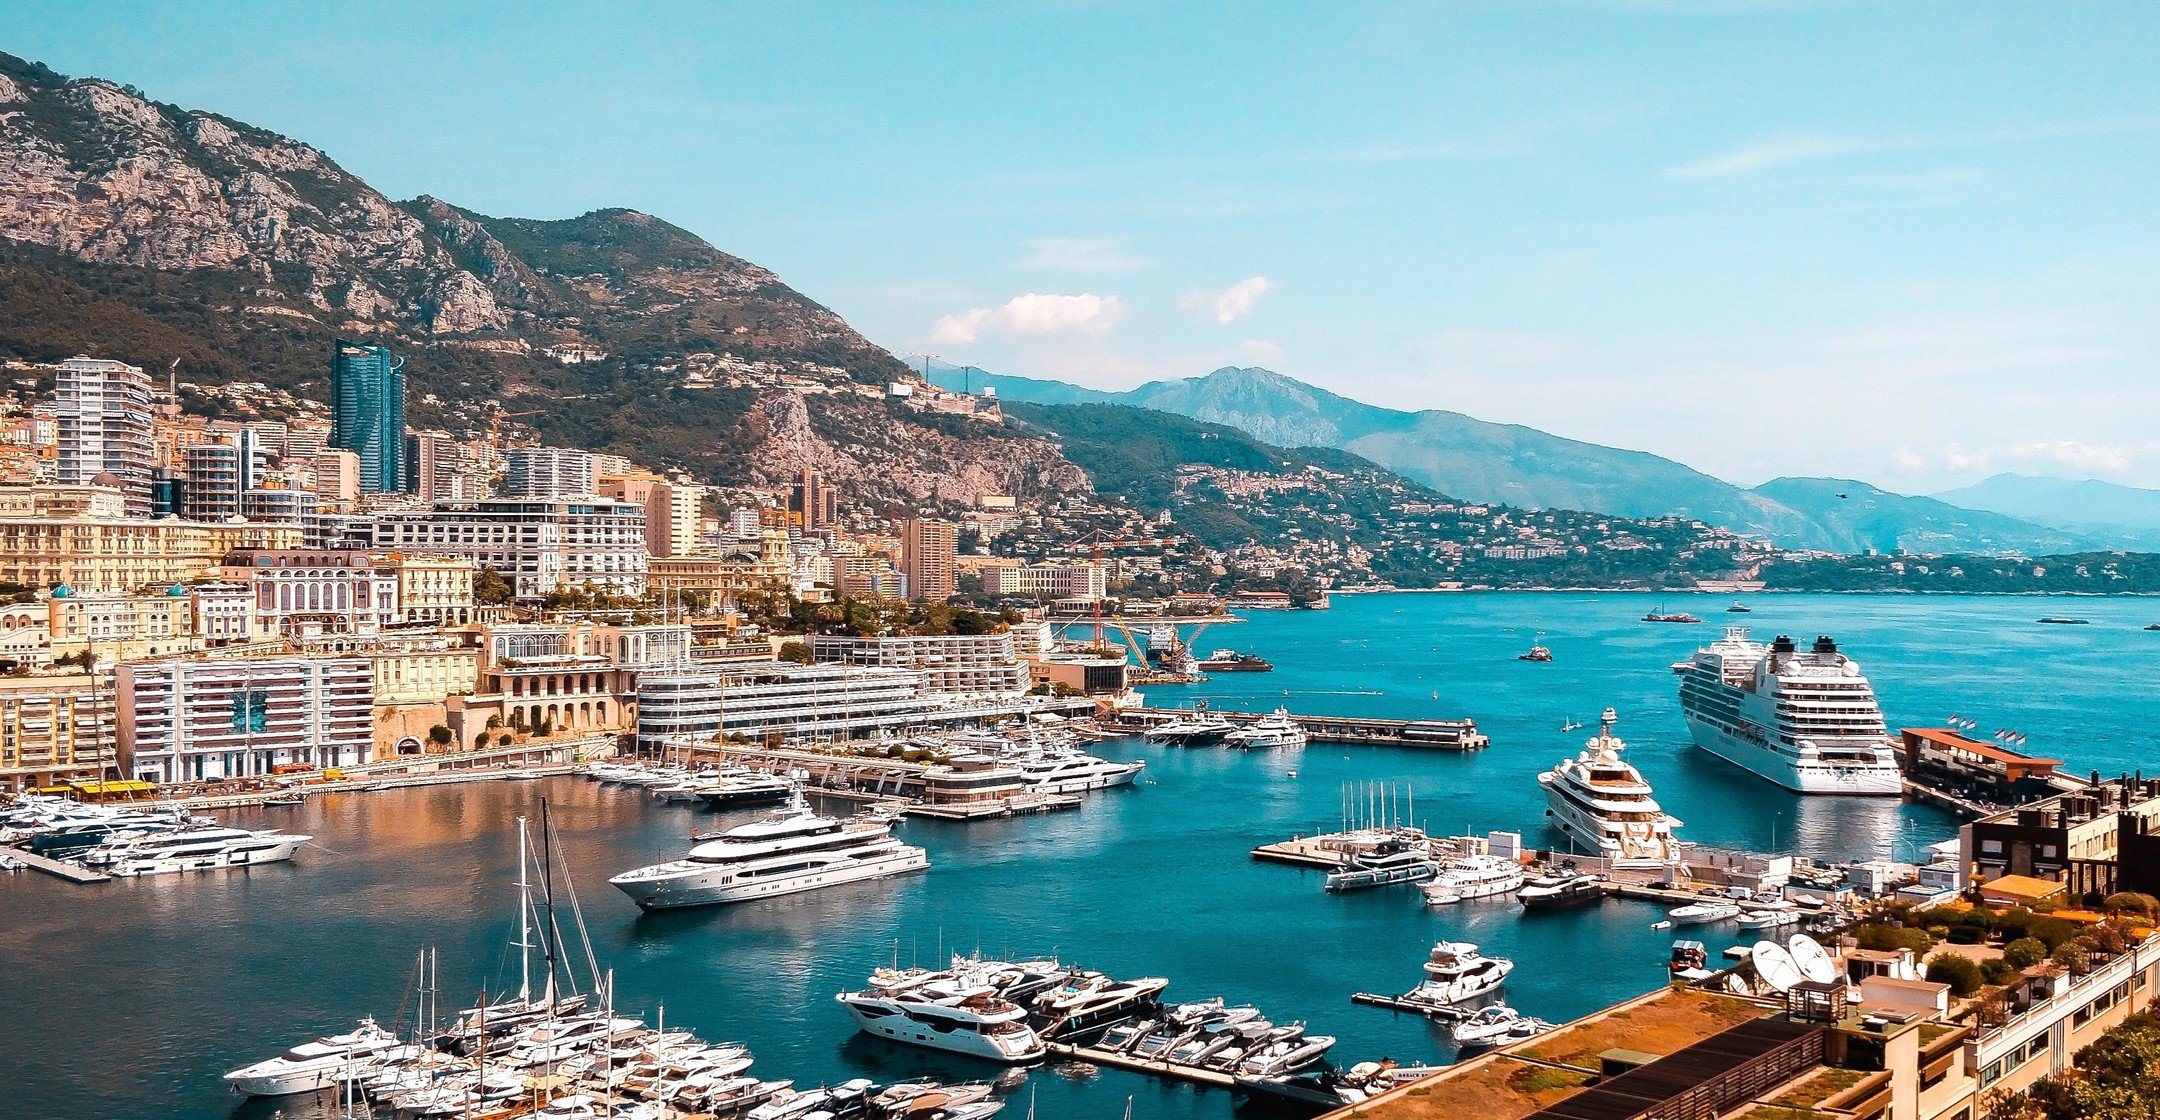 🇲🇨 Twenty One Interesting Facts That You Might Not Know About The Principality of Monaco

1. Monaco is the second smallest country in the world, after the Vatican City, and is known for its glamorous lifestyle, luxury casinos, and picturesque Medit